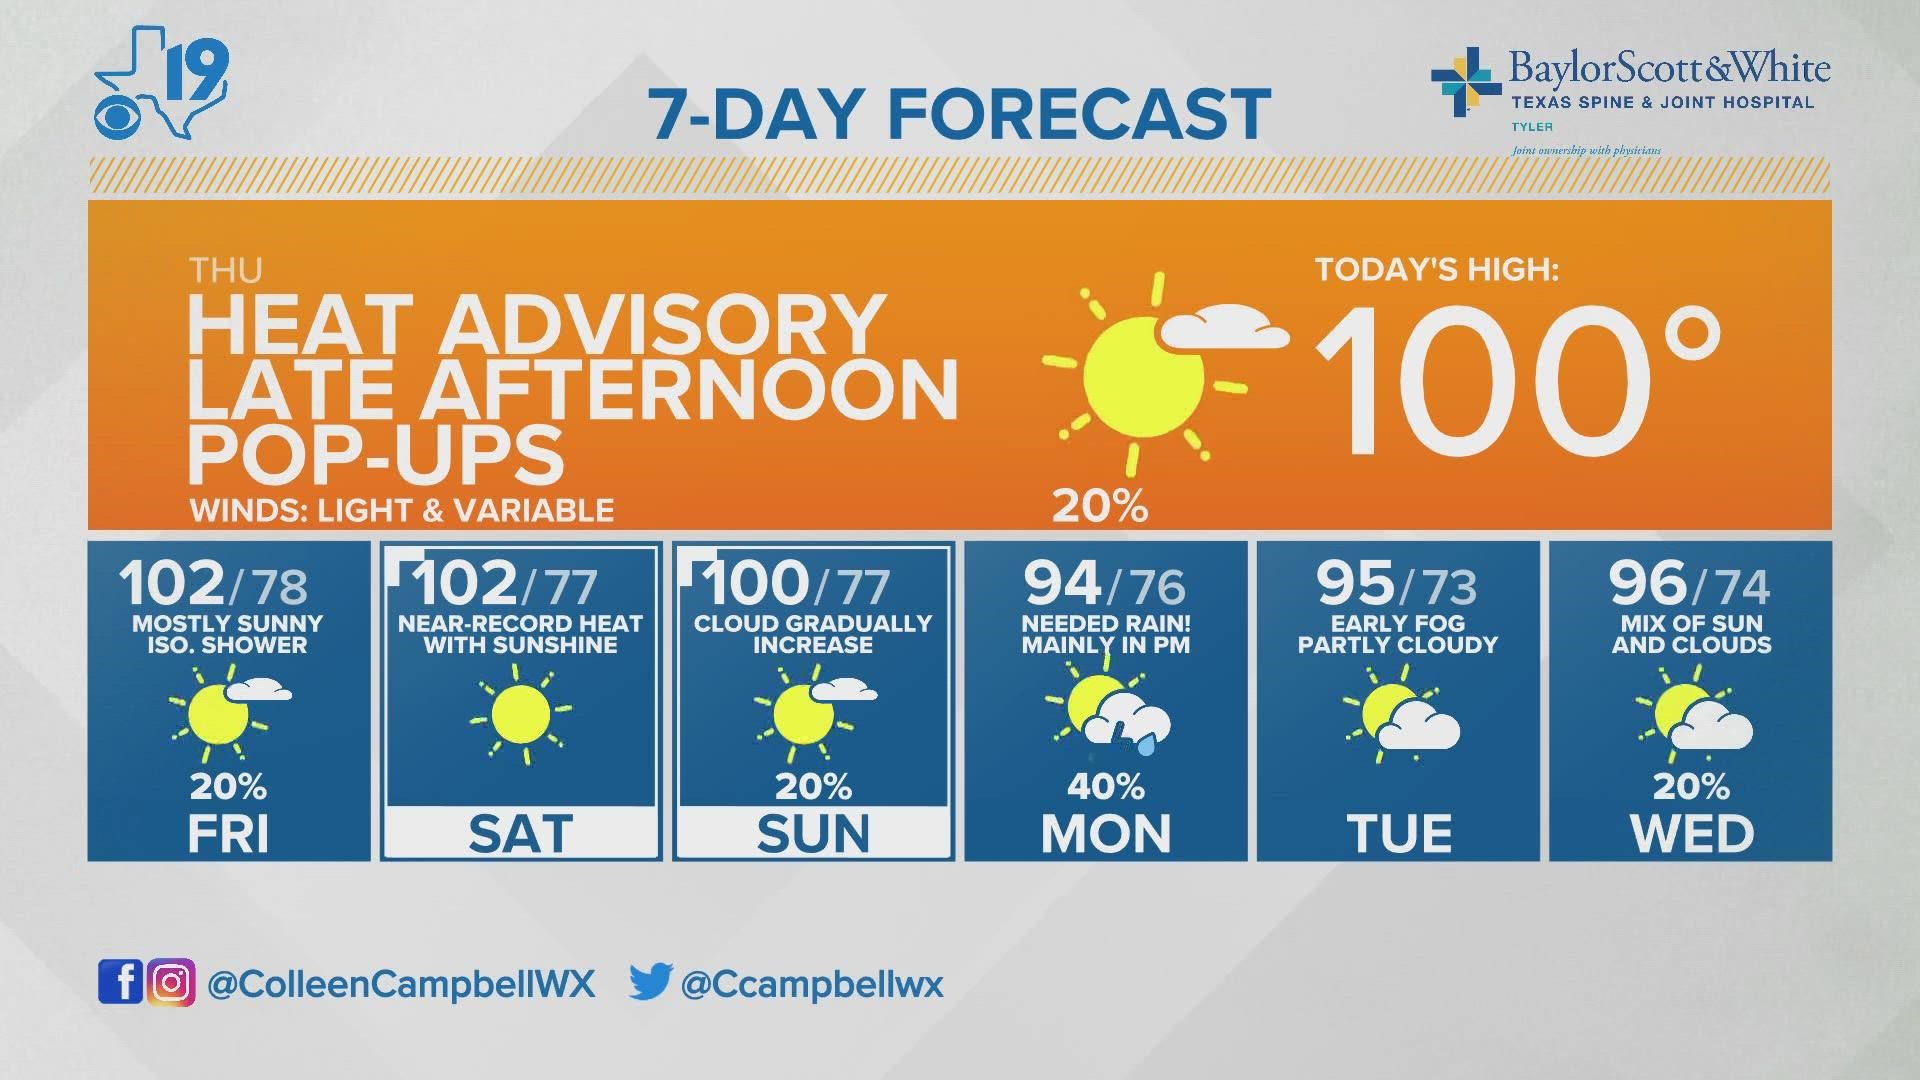 Another hot and humid day ahead with a heat advisory in effect for all of East Texas until 7 PM